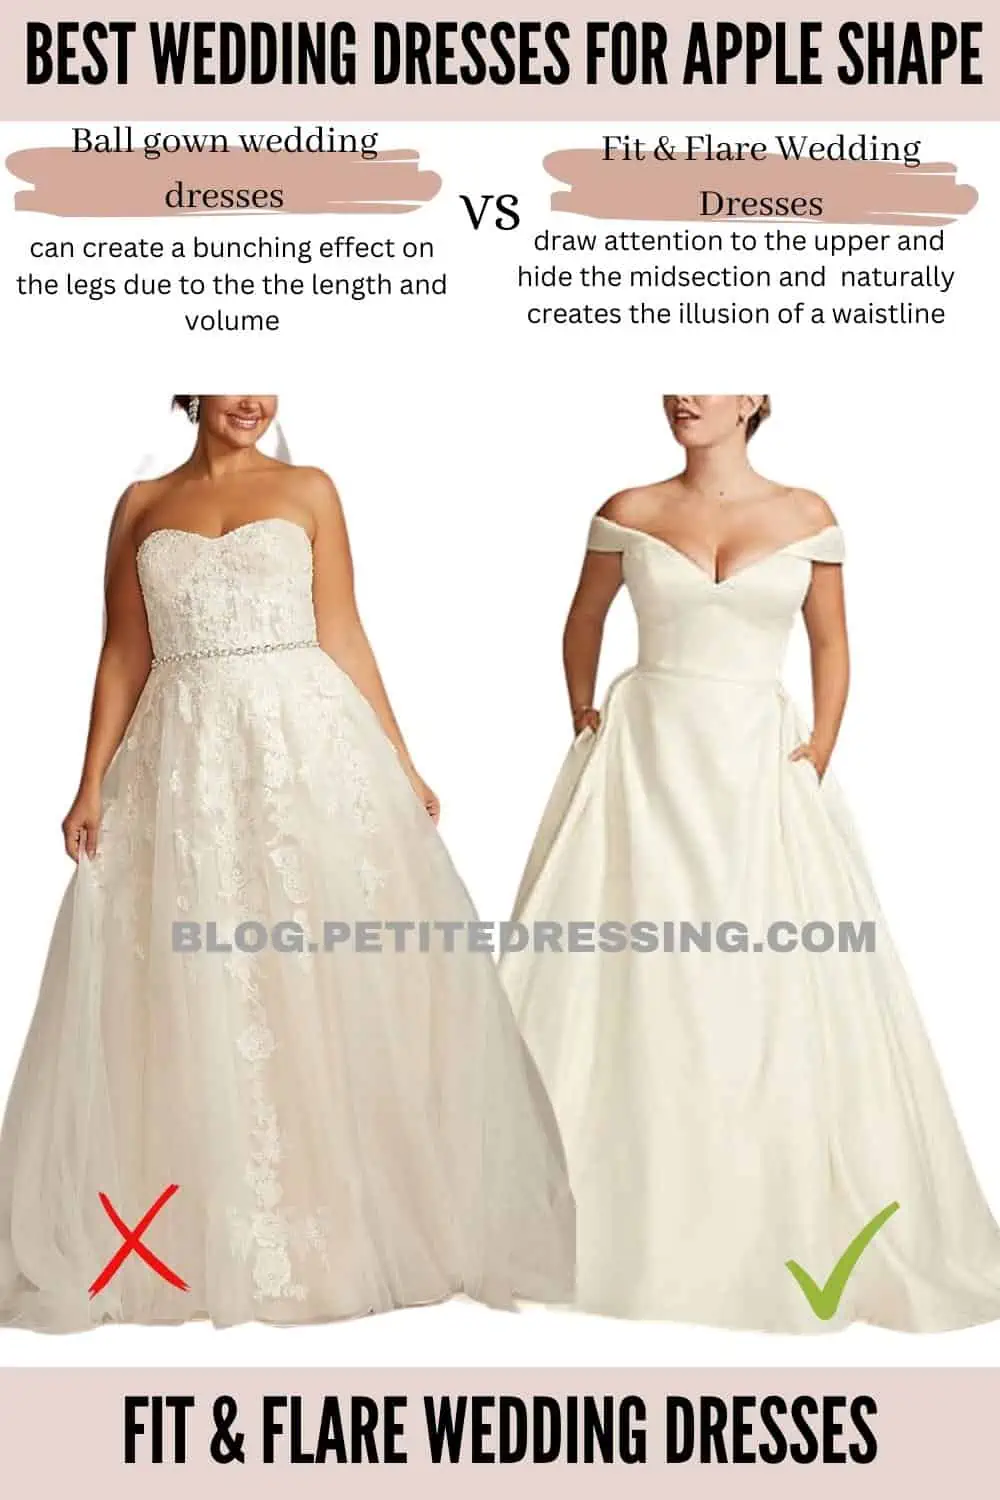 Which Wedding Dress Is Perfect for My Body Type? - Laguna Bridal